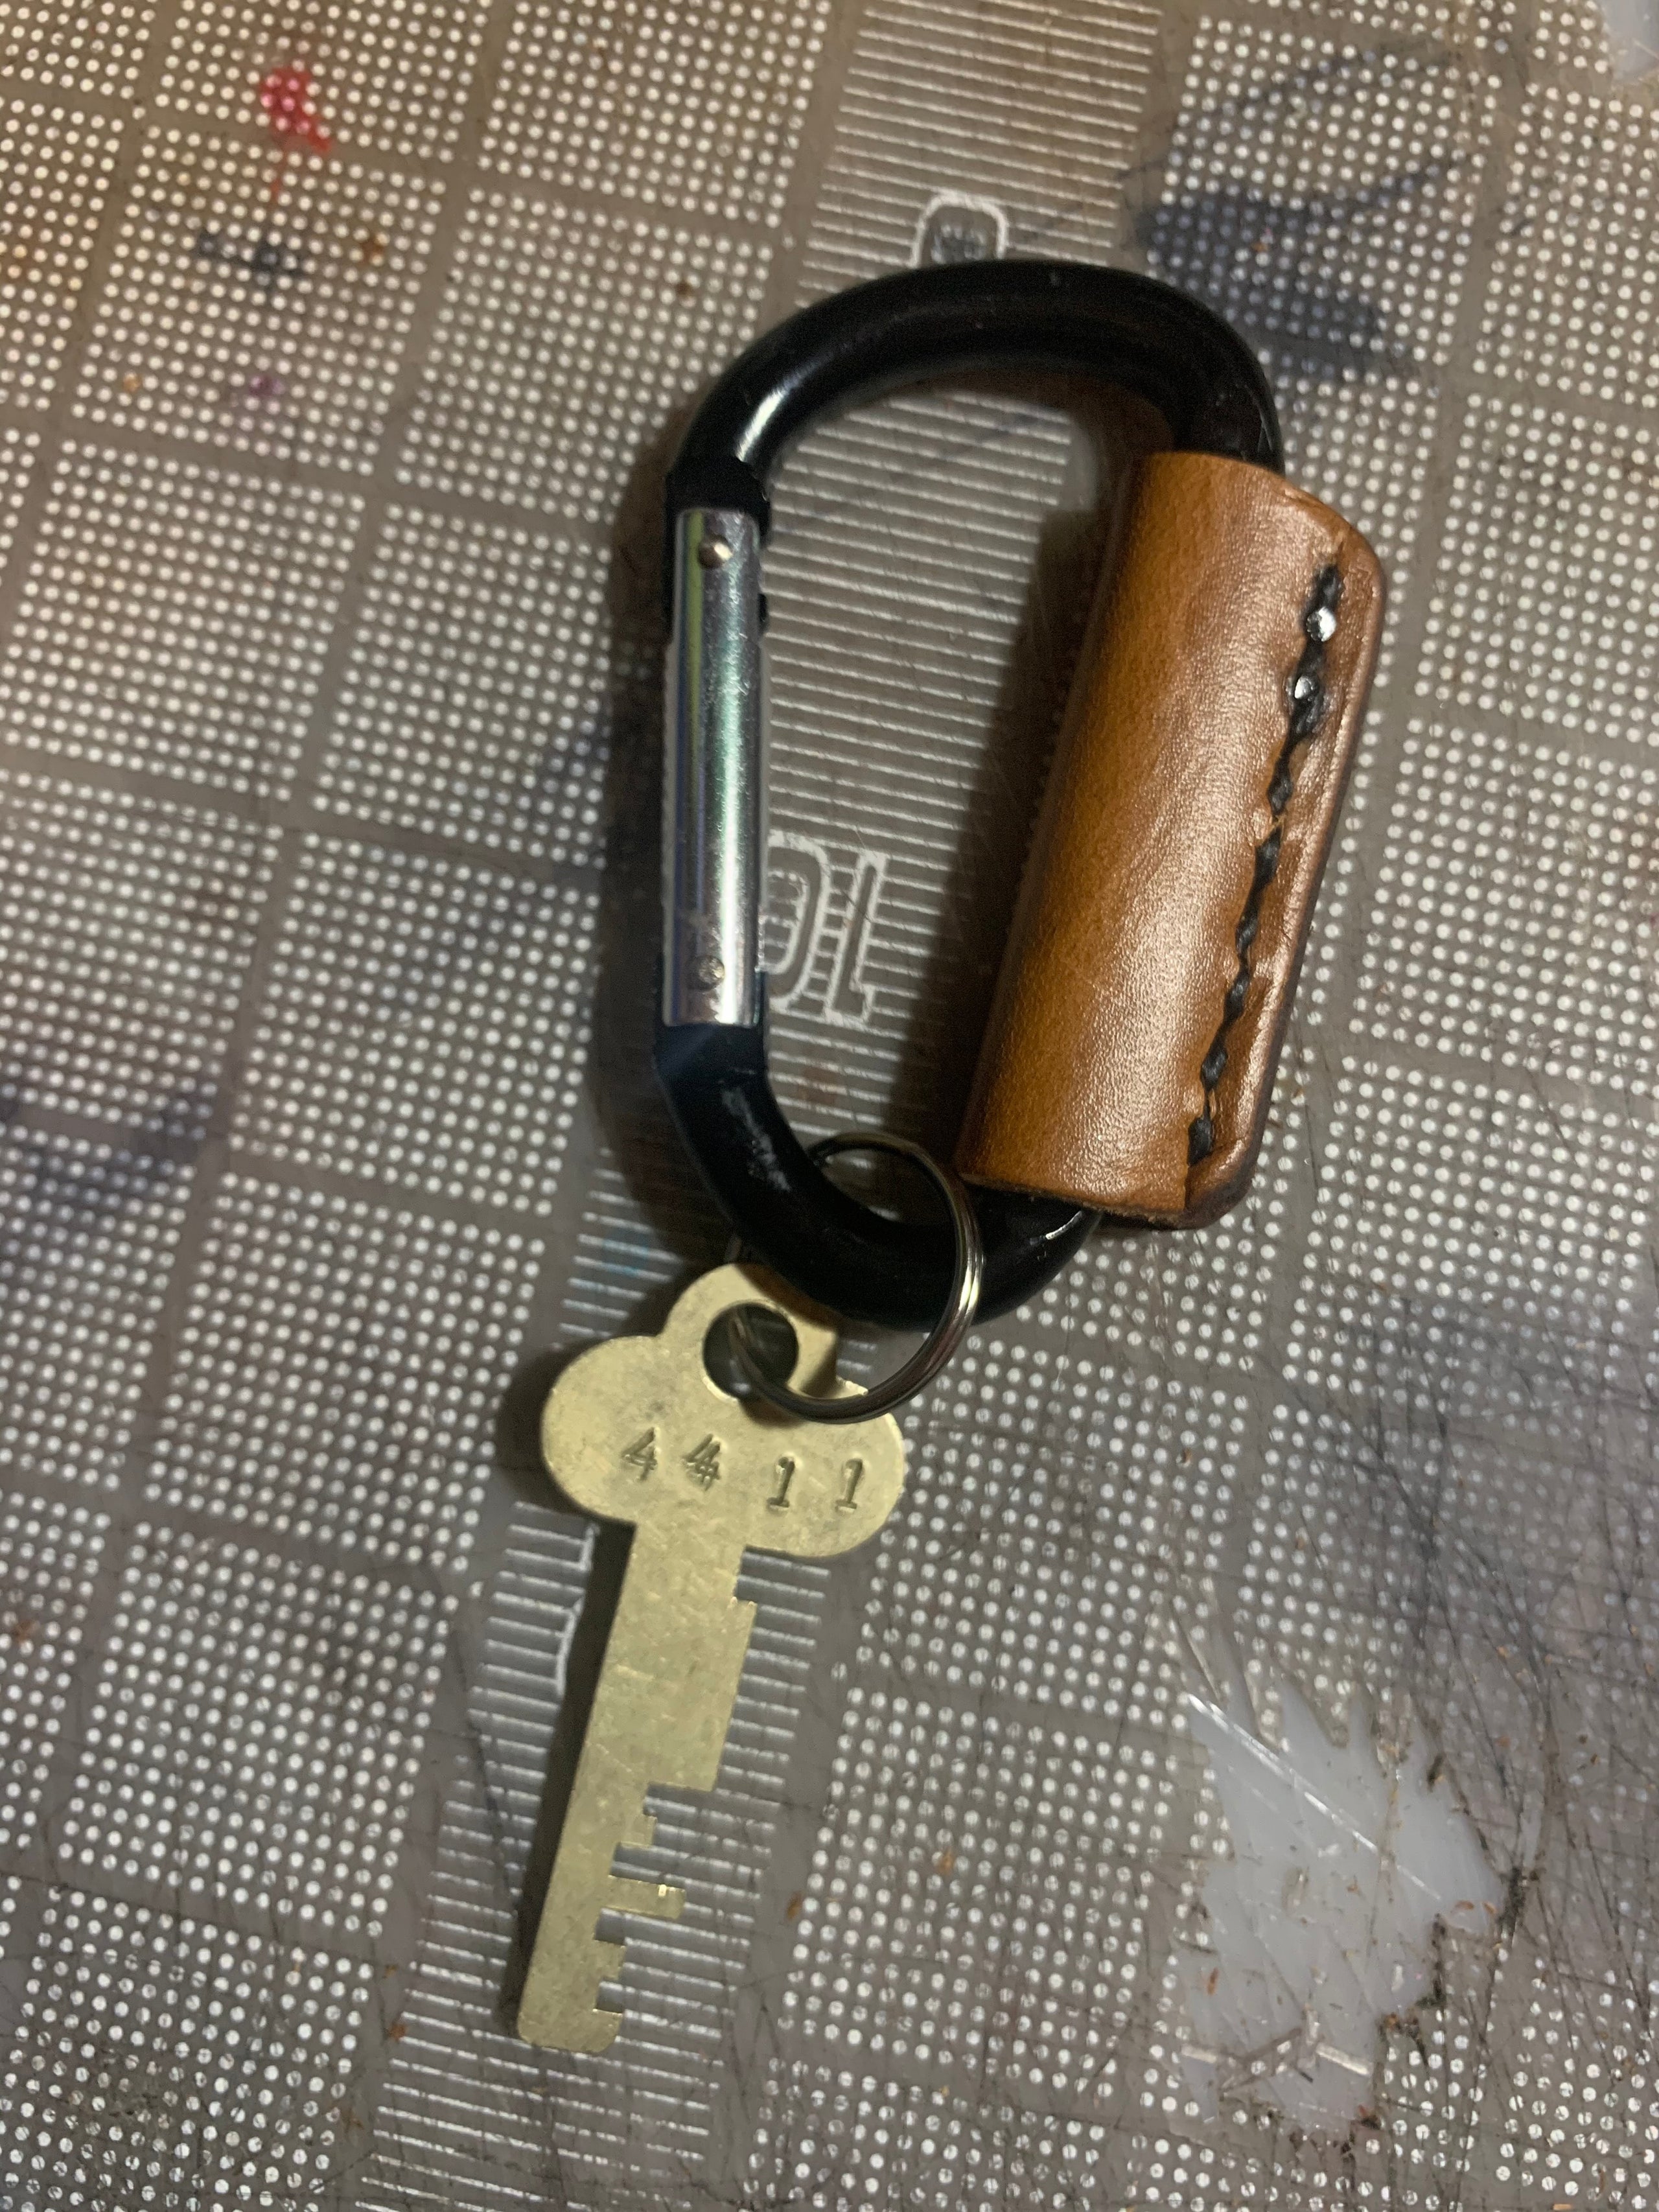 Leather wrap brass carabiner clip with whistle and key cover